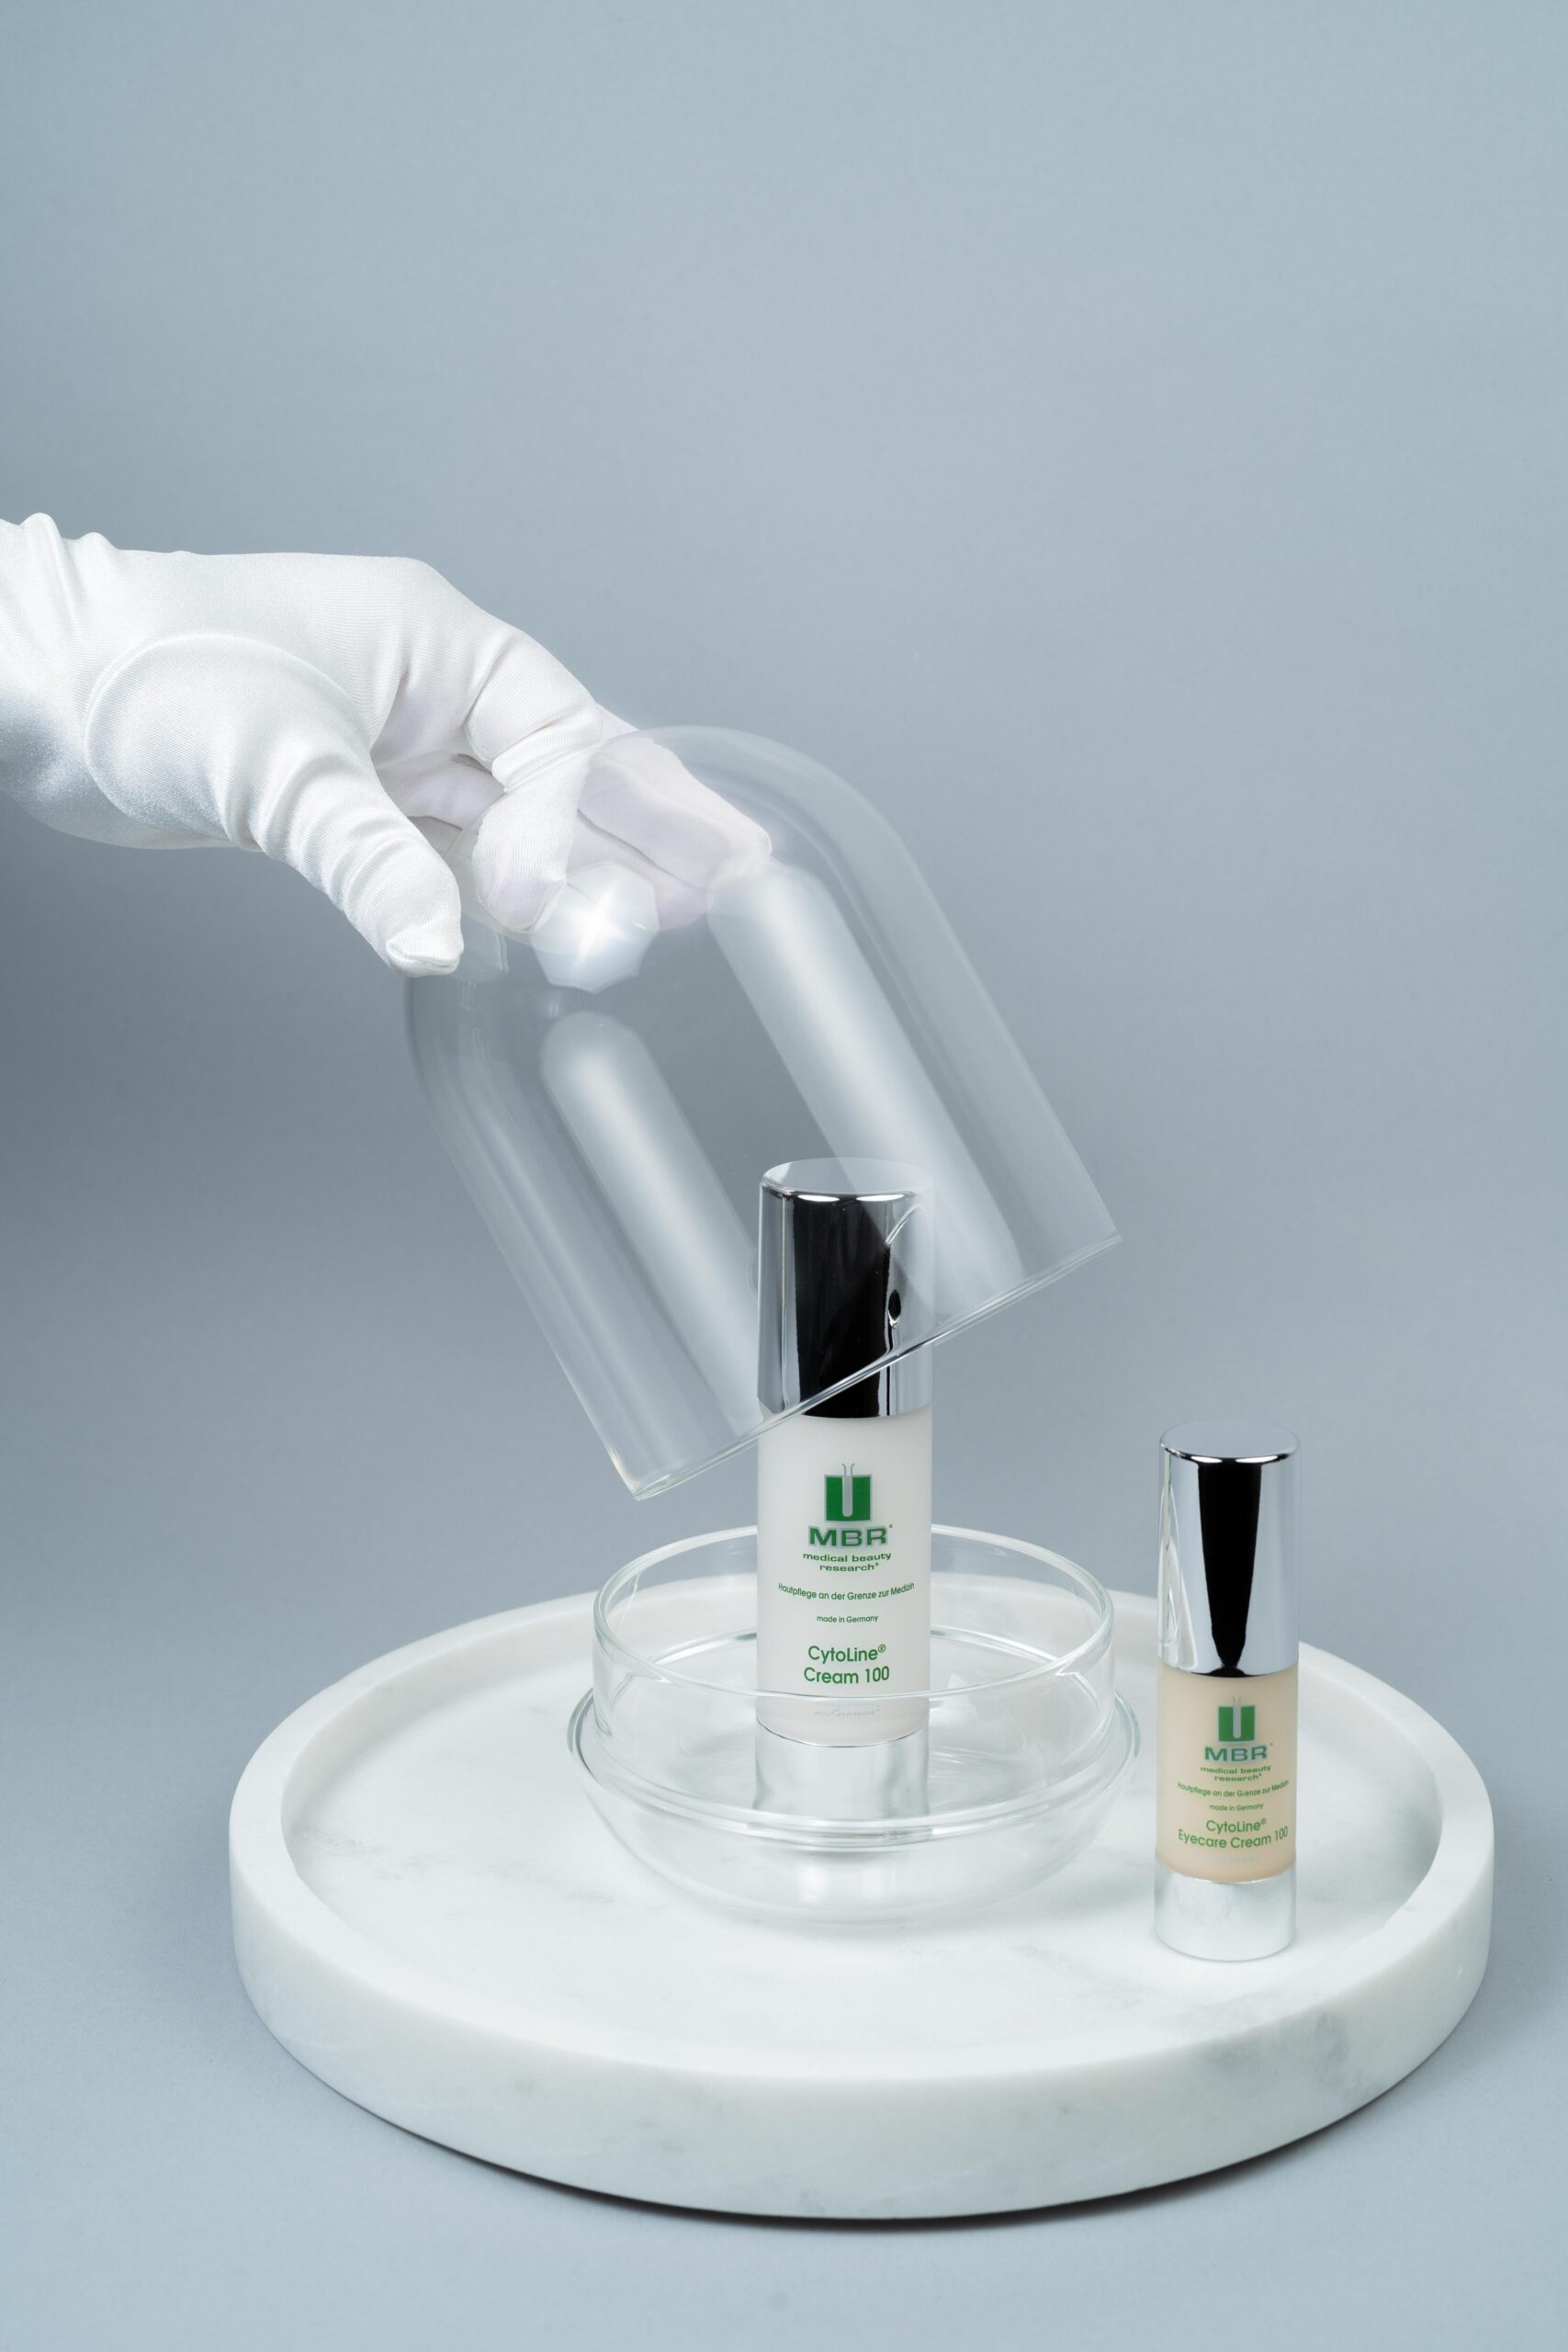 Graceful Cosmetics - MBR medical beauty research